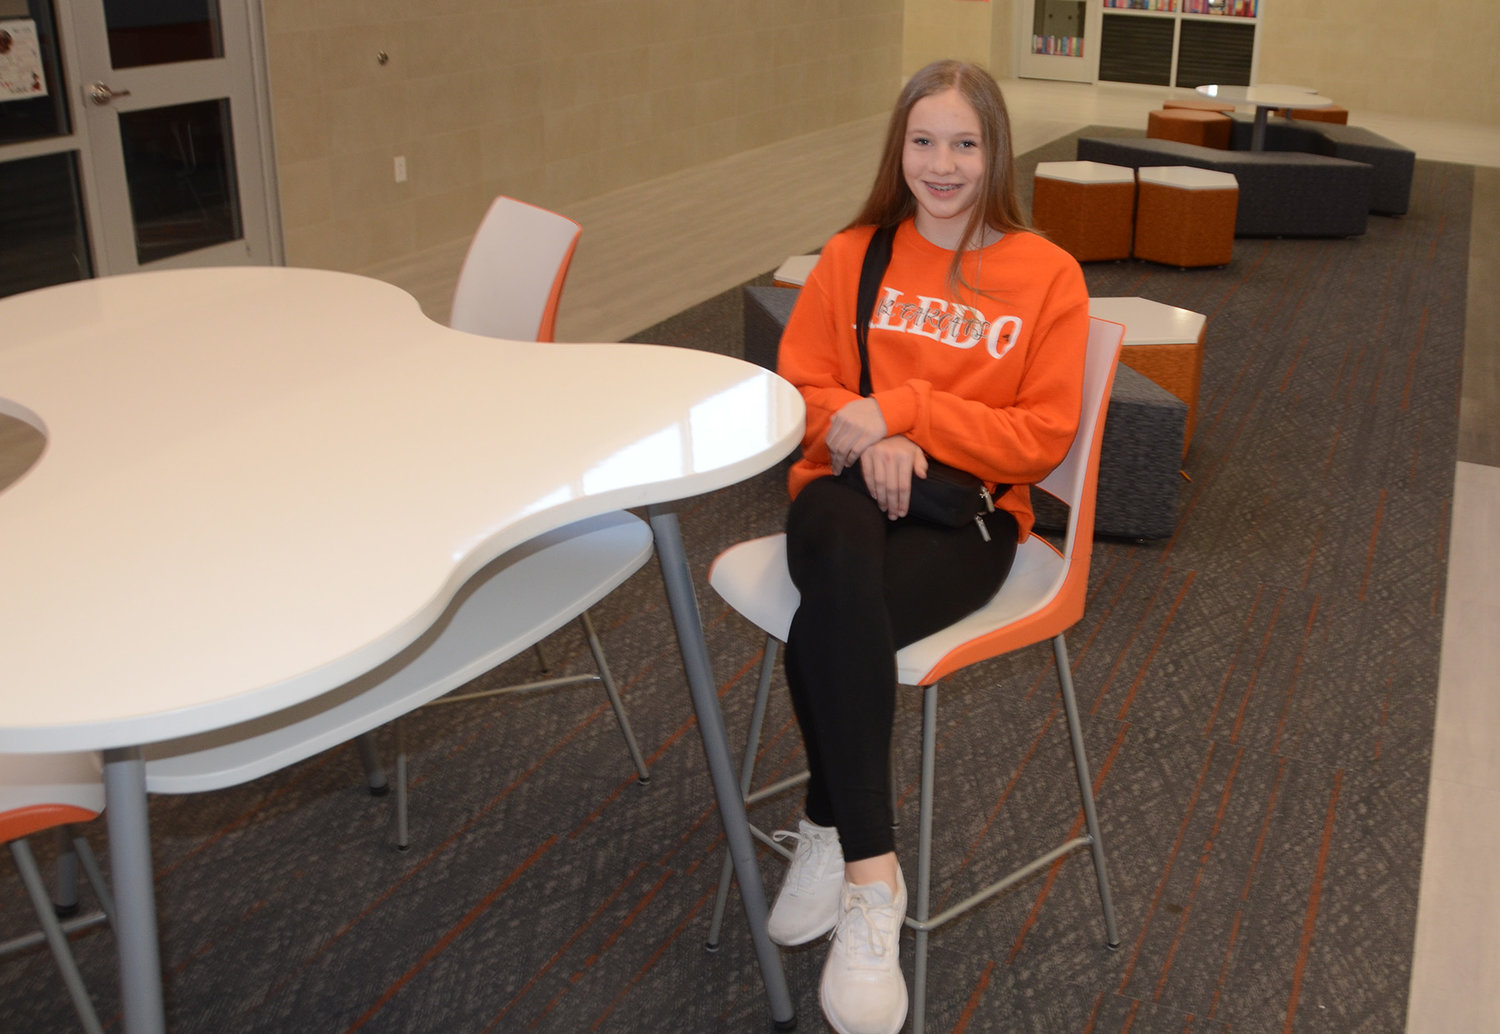 Eighth-grader Addison Eldridge relaxes in one of the collaboration areas of the campus. The hallway lounges are conducive to study and brain-storming with comfortable seating and white marker boards on the walls.